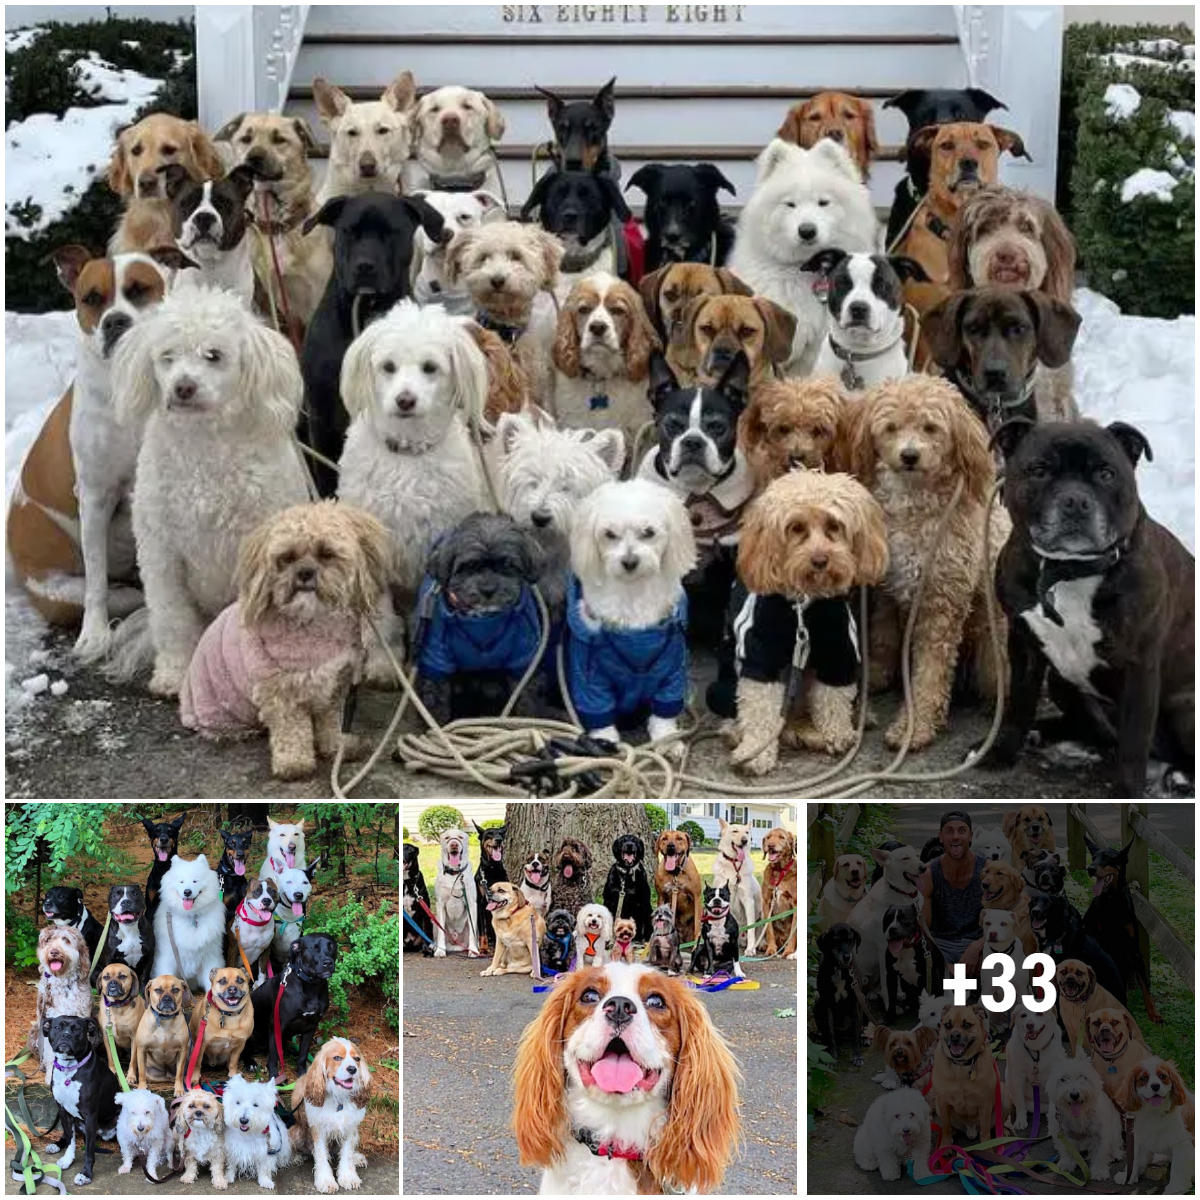 Every day, a dog walker in New York takes adorable group photos giving his beautiful dogs an extremely beautiful and cute community.